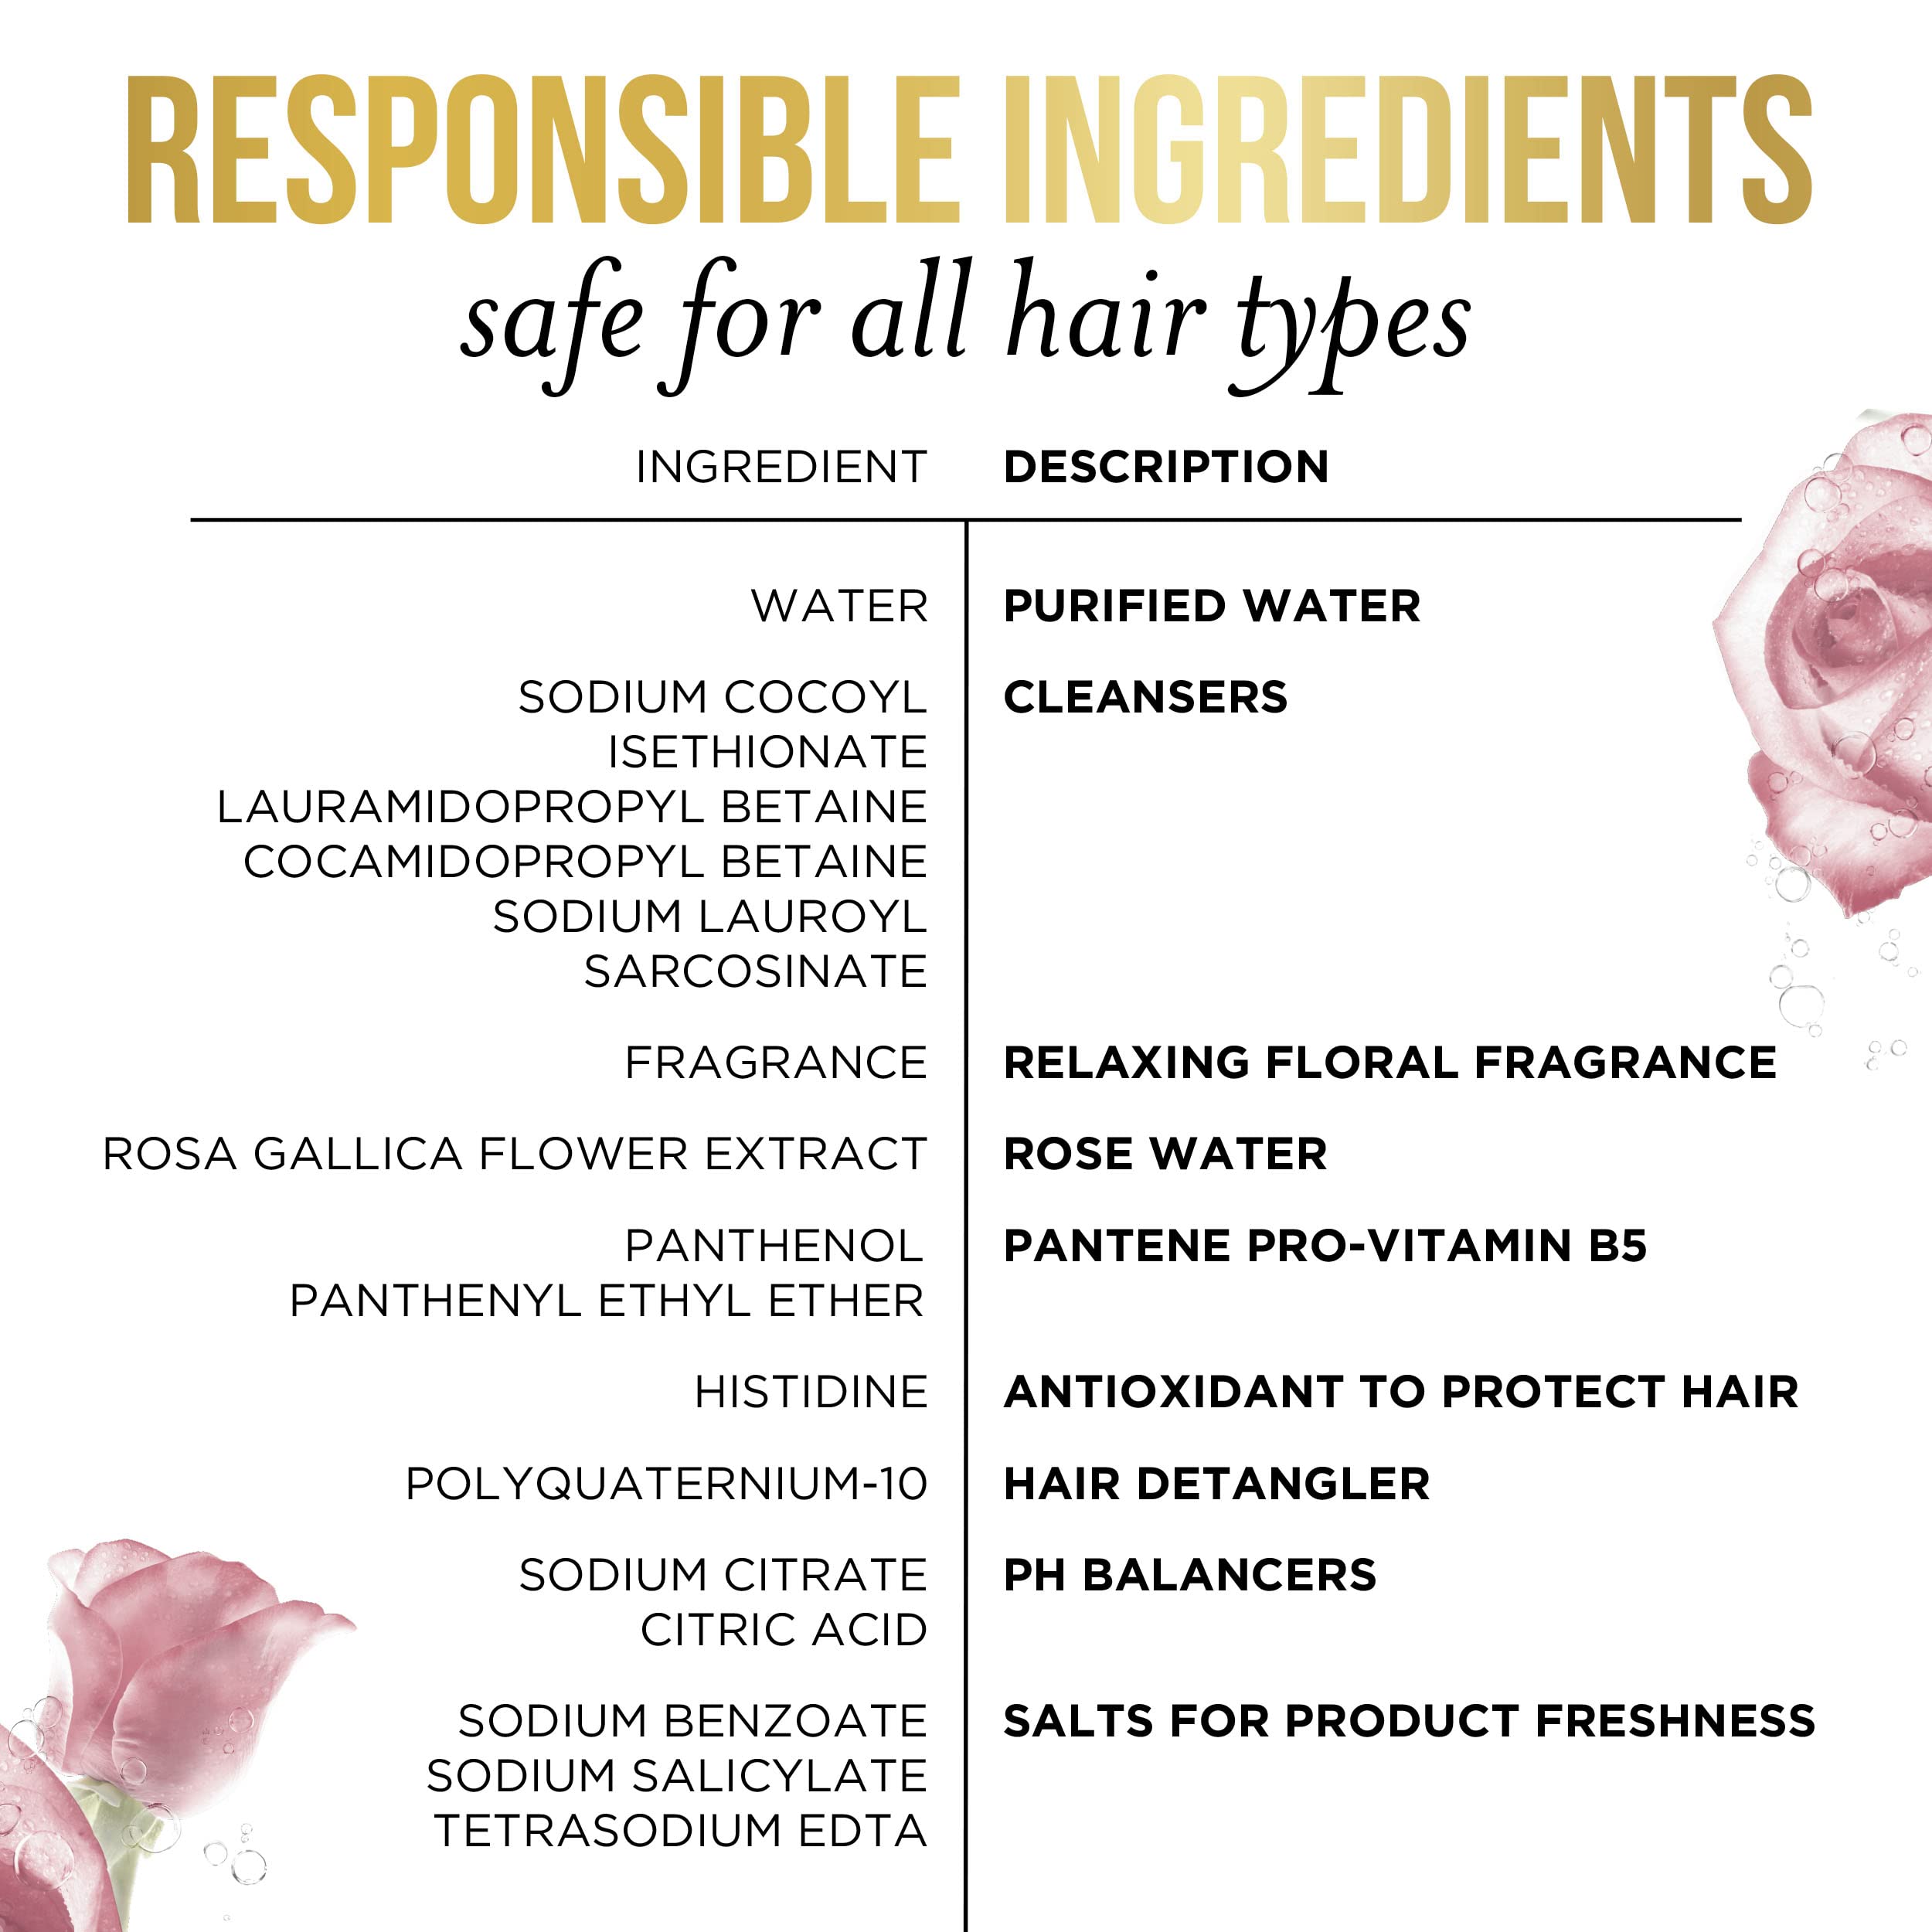 Pantene Sulfate Free Rose Water Shampoo, Soothes, Replenishes Hydration, Safe for Color Treated Hair, Nutrient Infused with Vitamin B5 and Antioxidants, Pro-V Blends, 30.0 oz